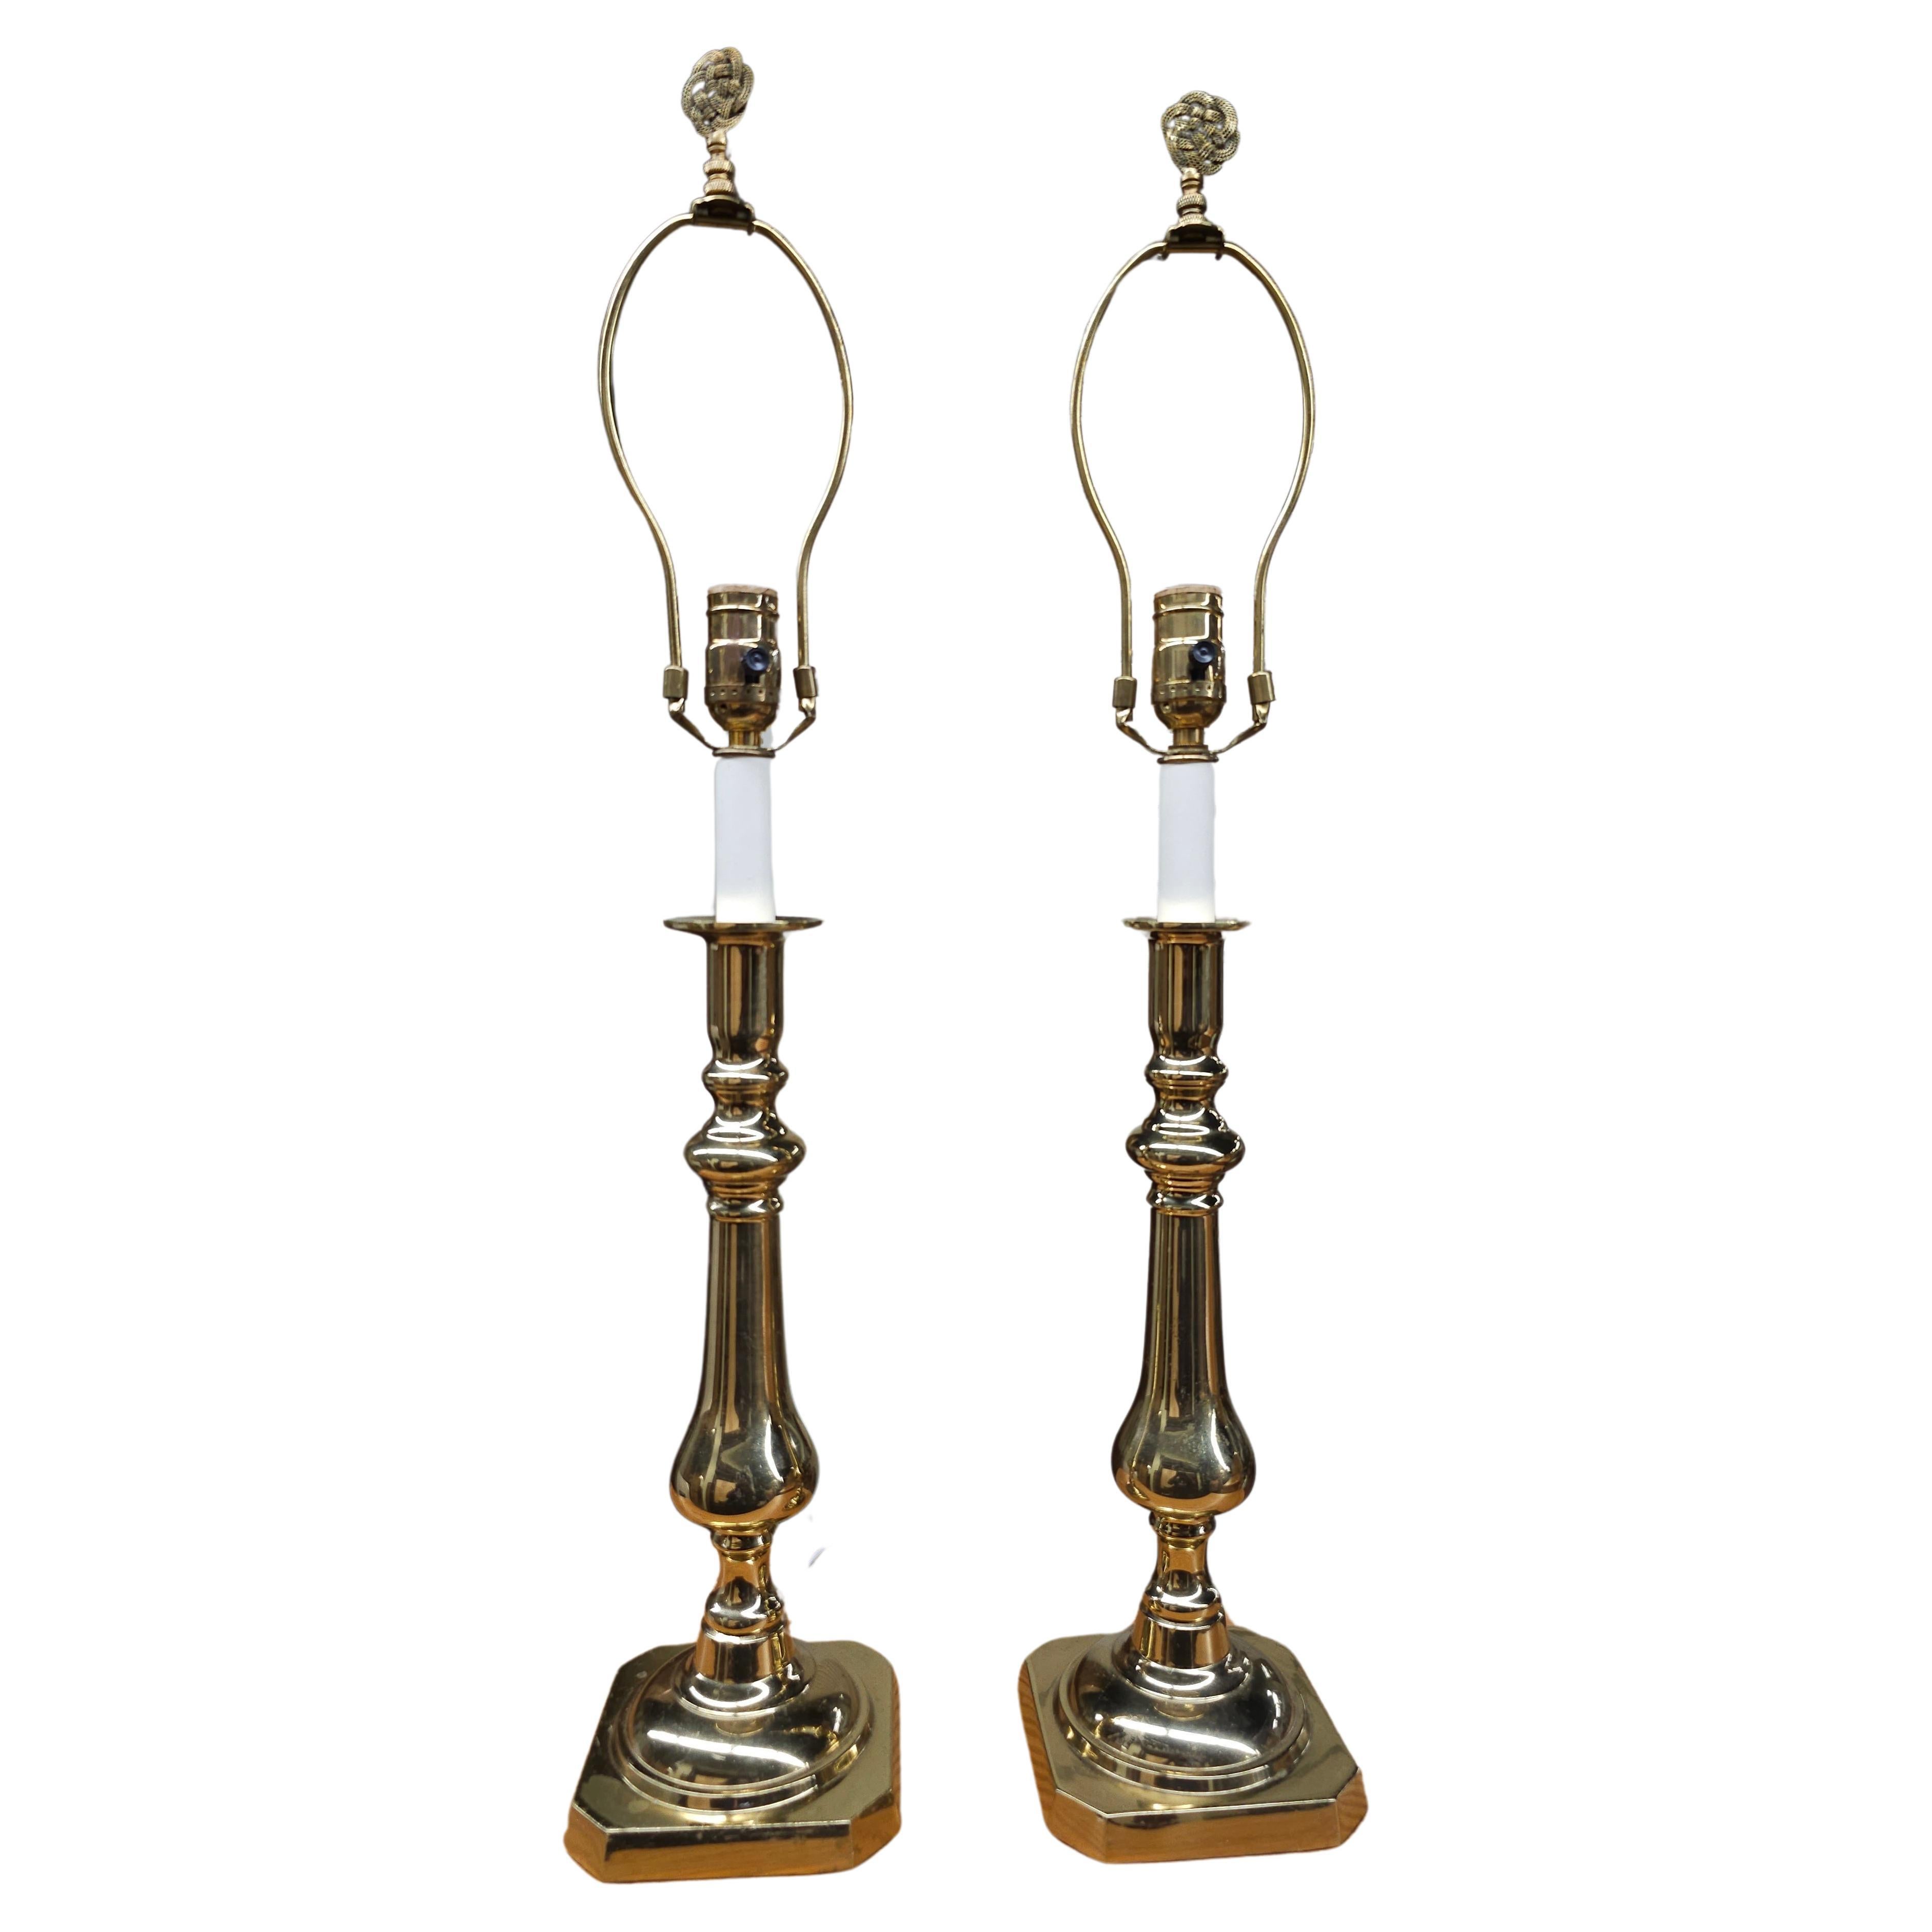 Virginia MetalCrafters Neoclassical Solid Polished Brass CandleStick Table Lamps For Sale